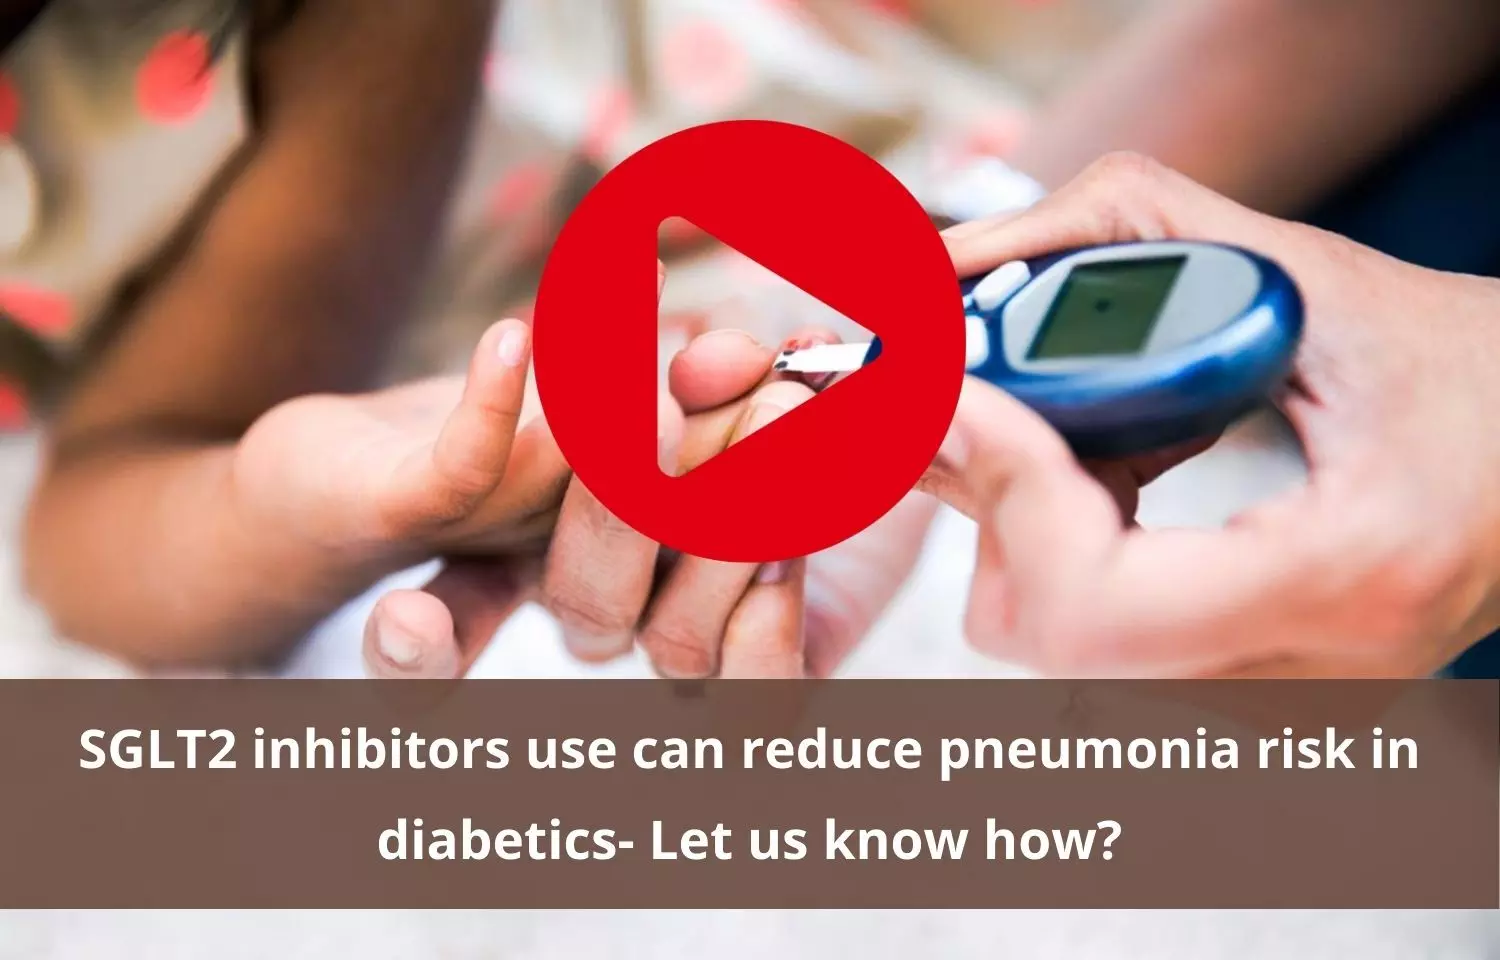 Pneumonia risk in diabetic patients to be reduced by SGLT2 inhibitors